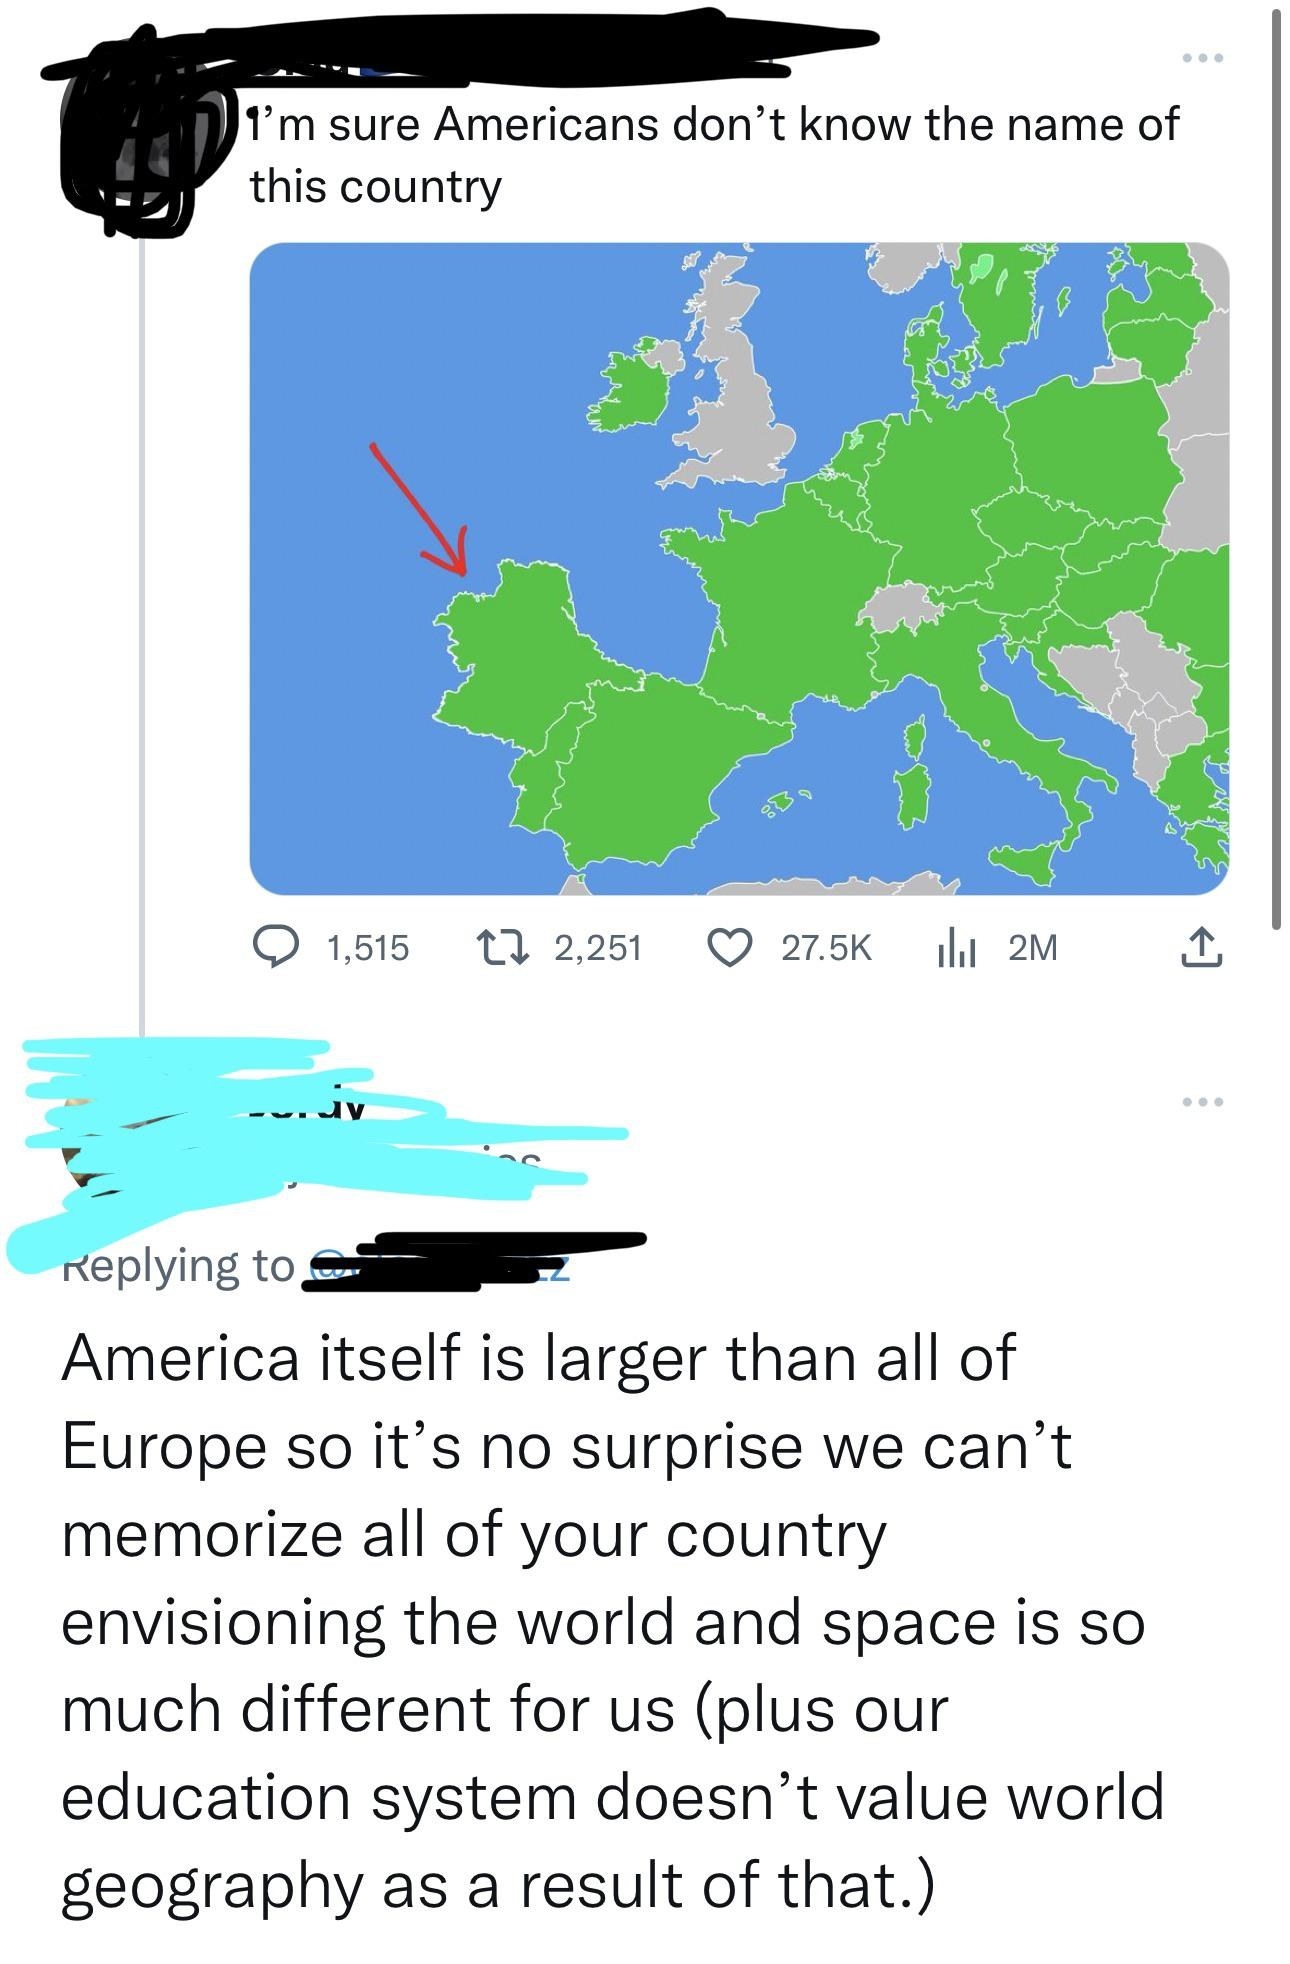 American who says they don&#x27;t learn geography in school because America is larger than Europe and envisions the world and space differently and therefore doesn&#x27;t value geography